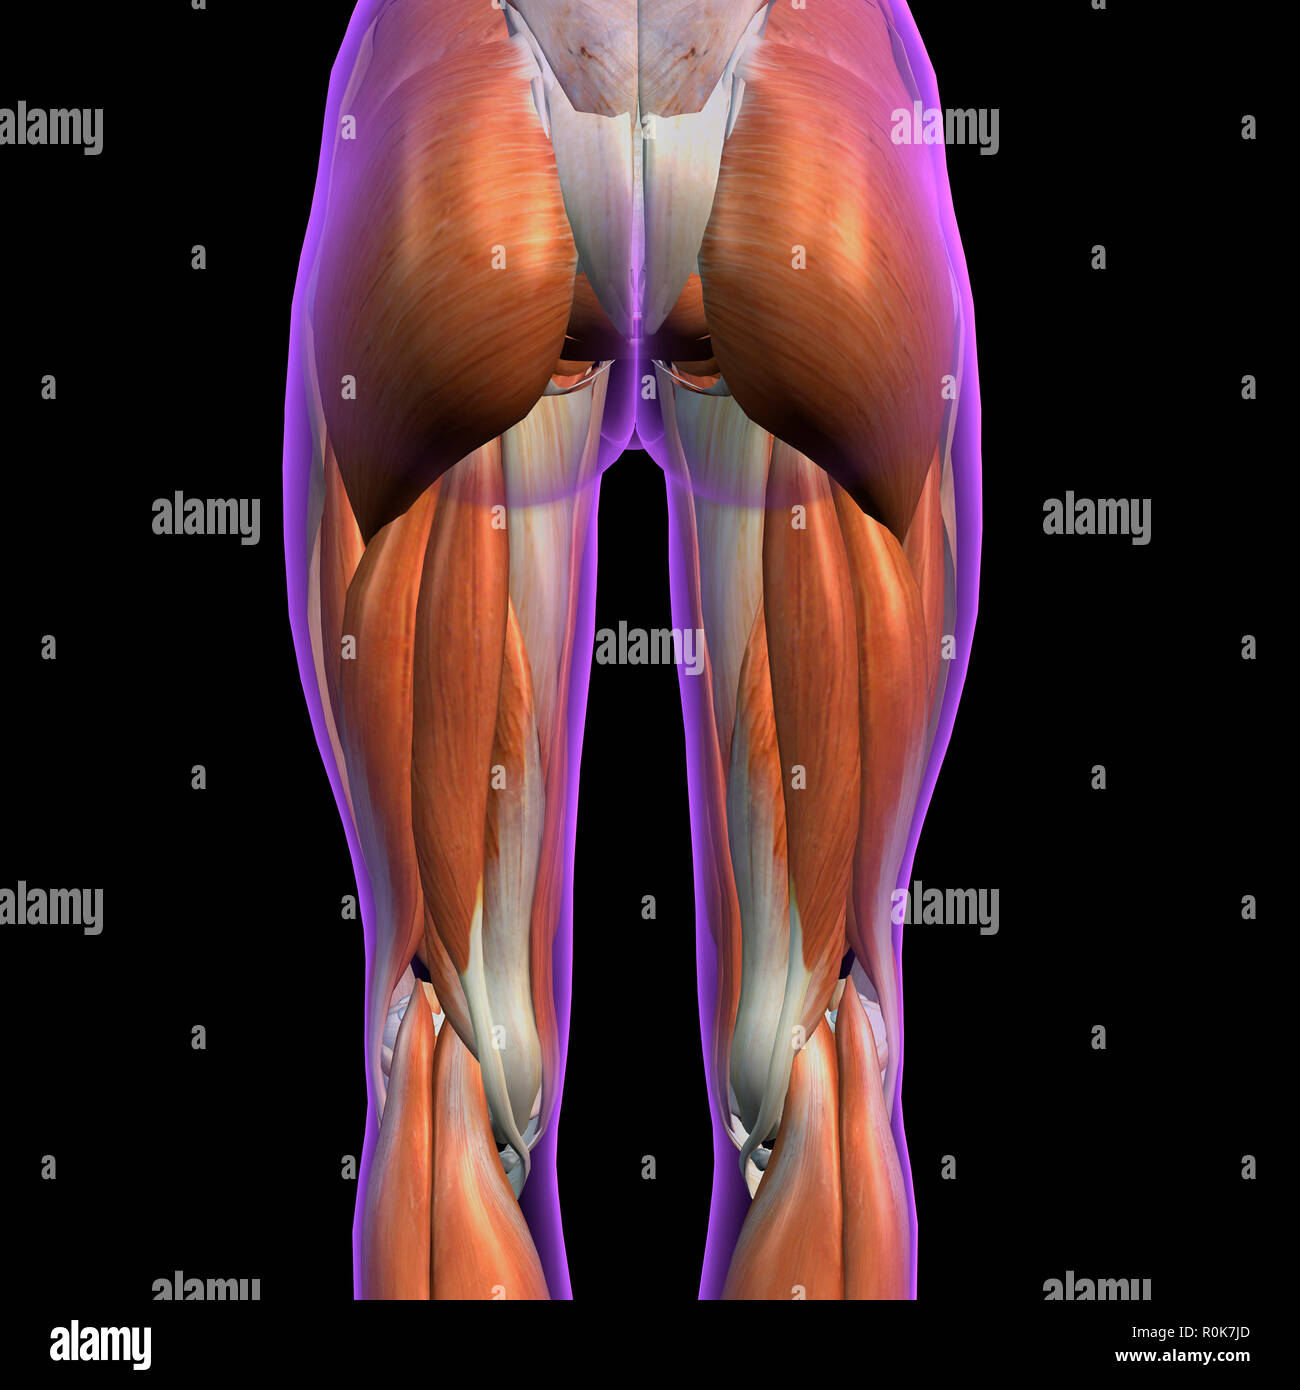 Posterior view of female hip and leg muscles on black background. Stock Photo